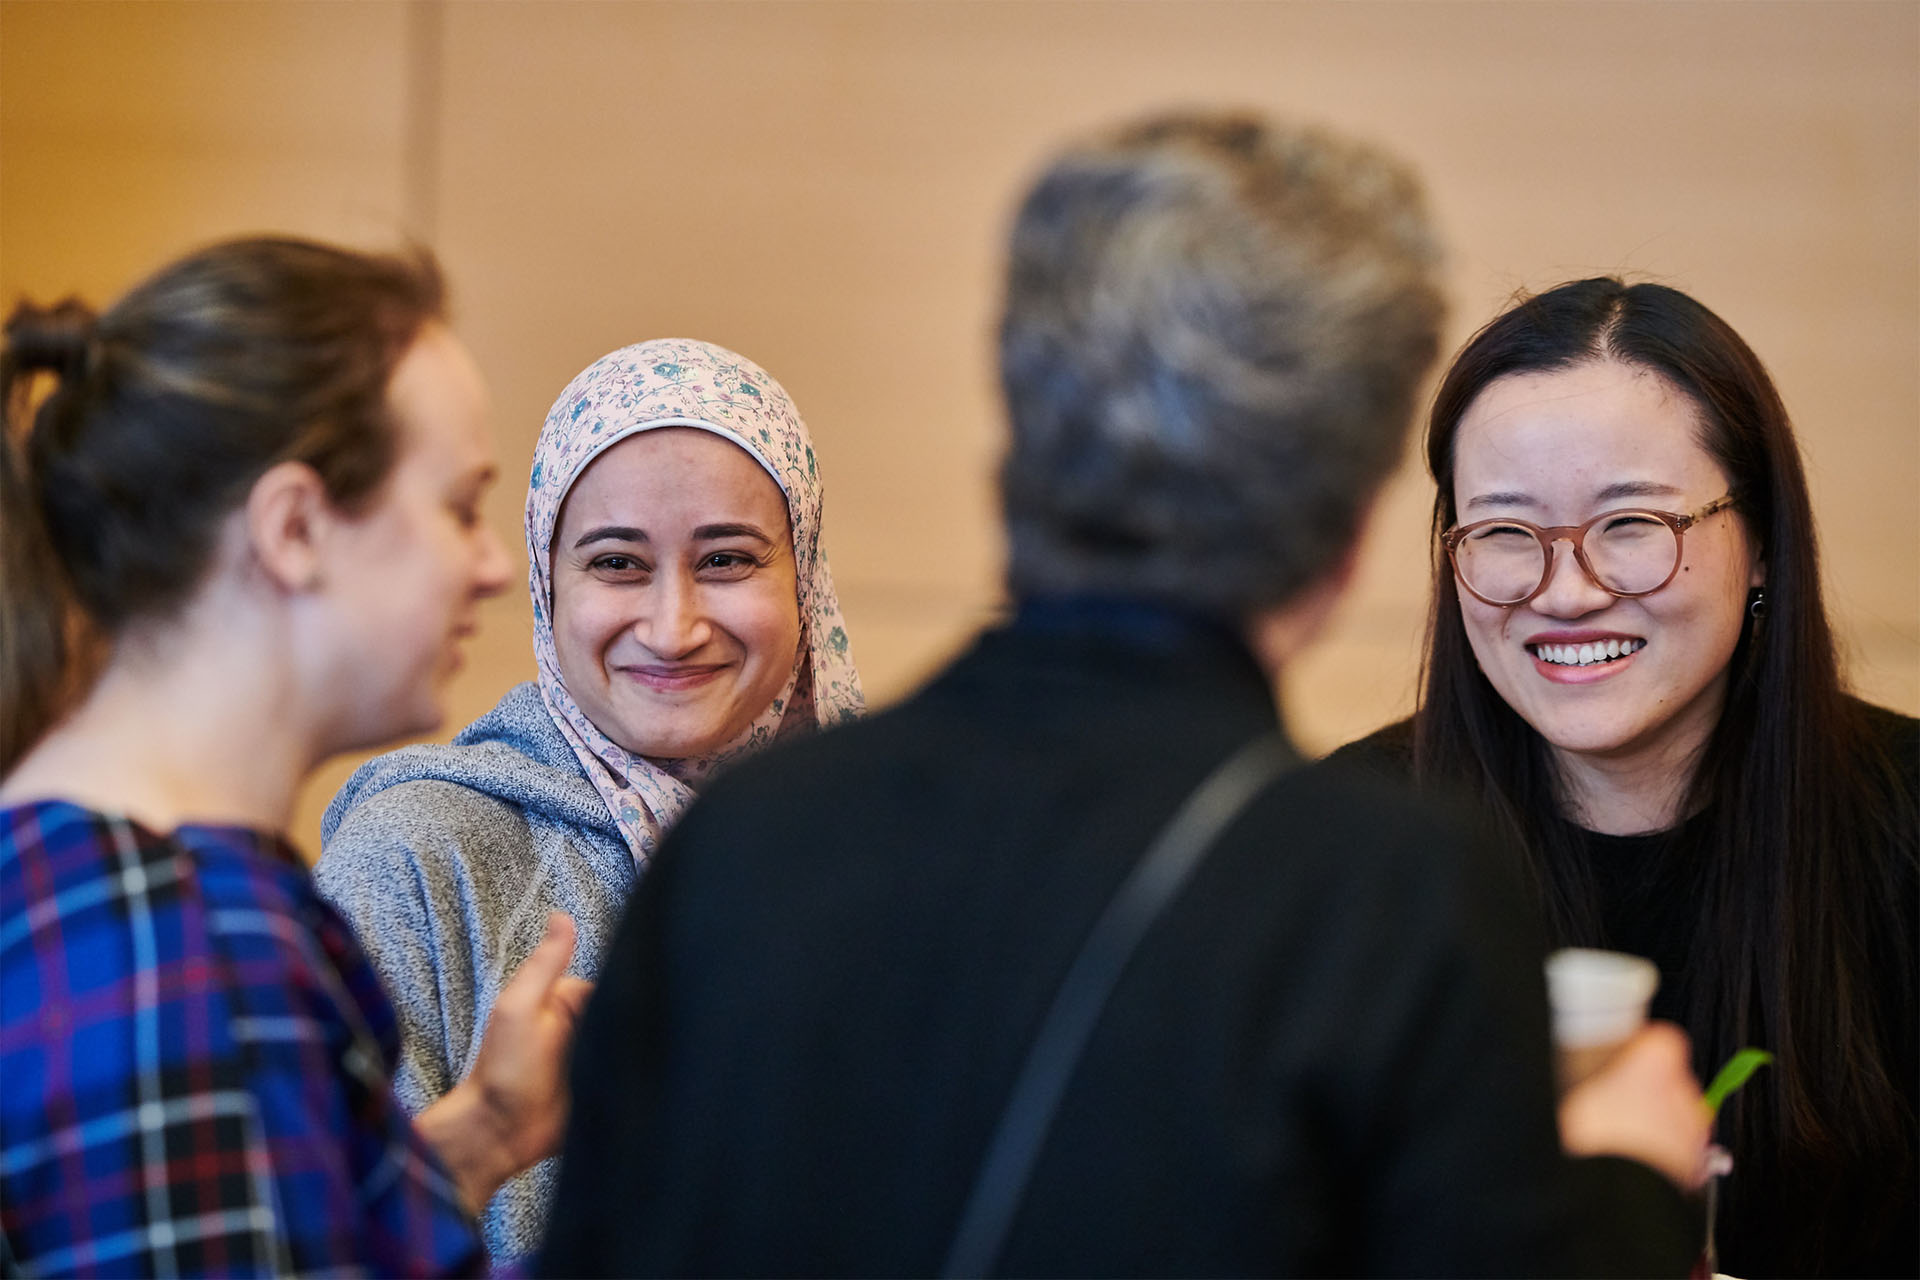 Two Telfer students, smiling and engaged in conversation with other event attendees.